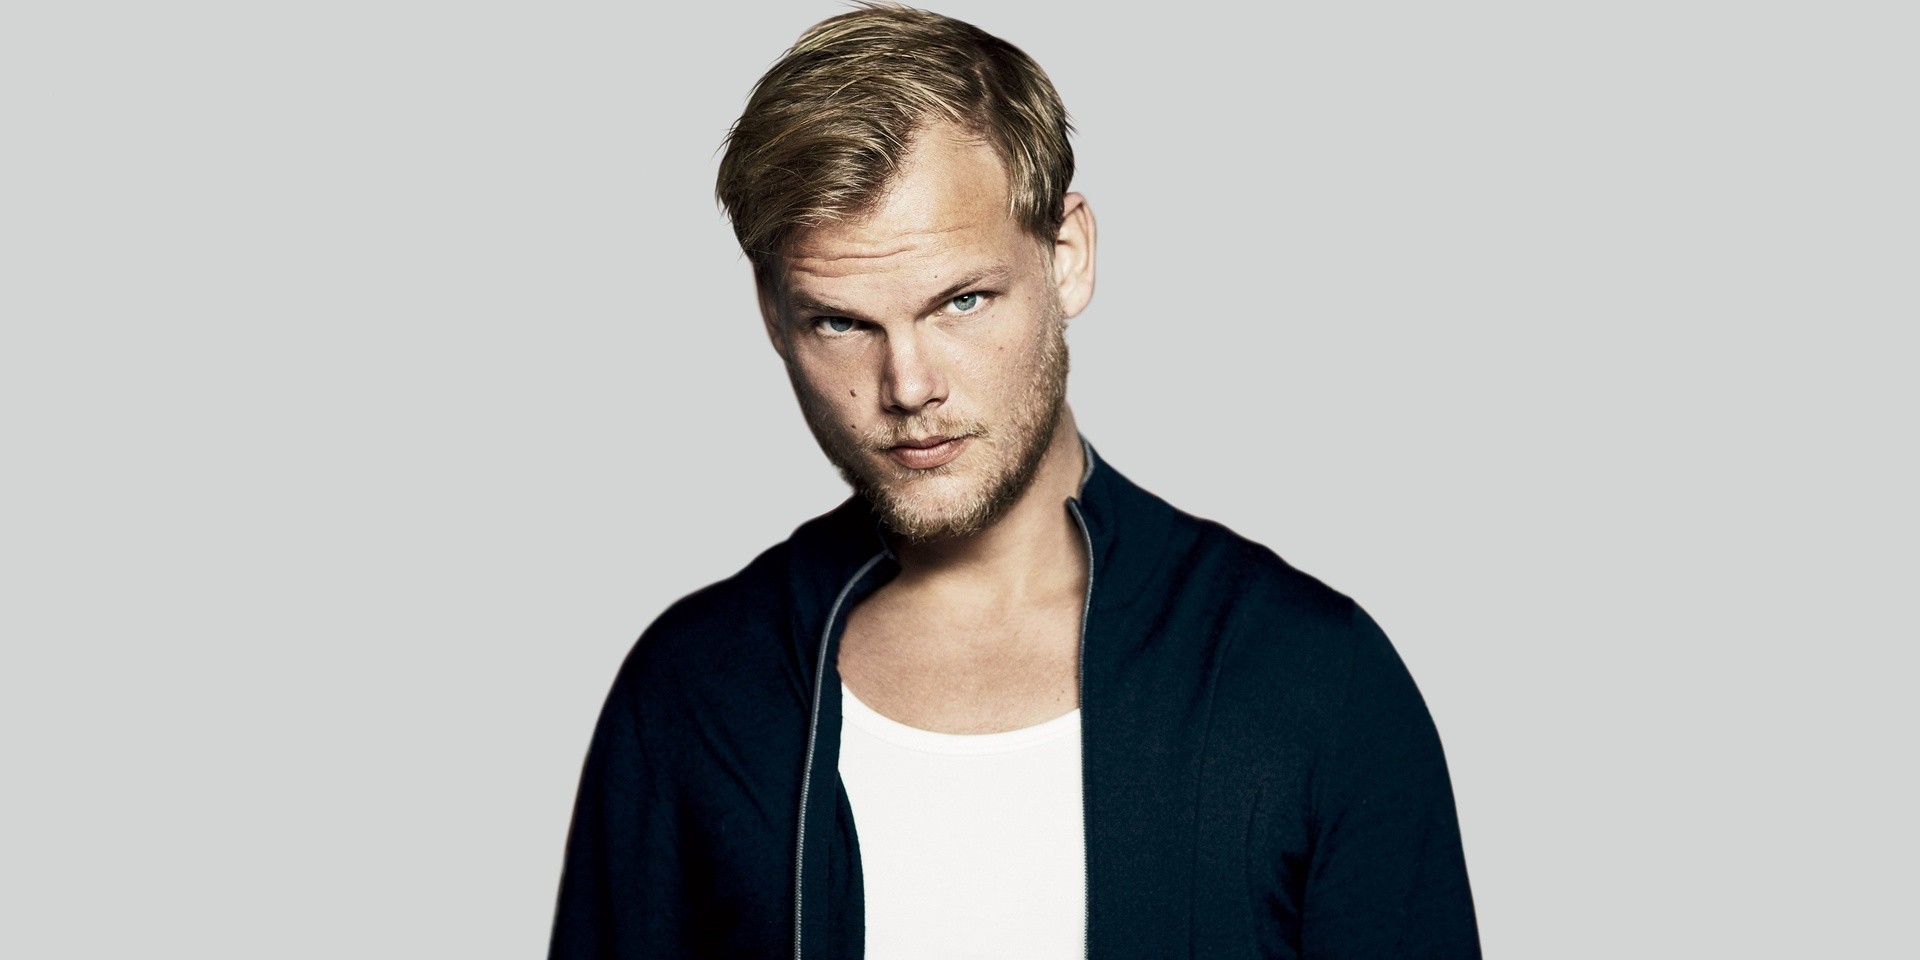 Avicii's first posthumous song 'S.O.S' is an emotional reminder of his legacy – listen